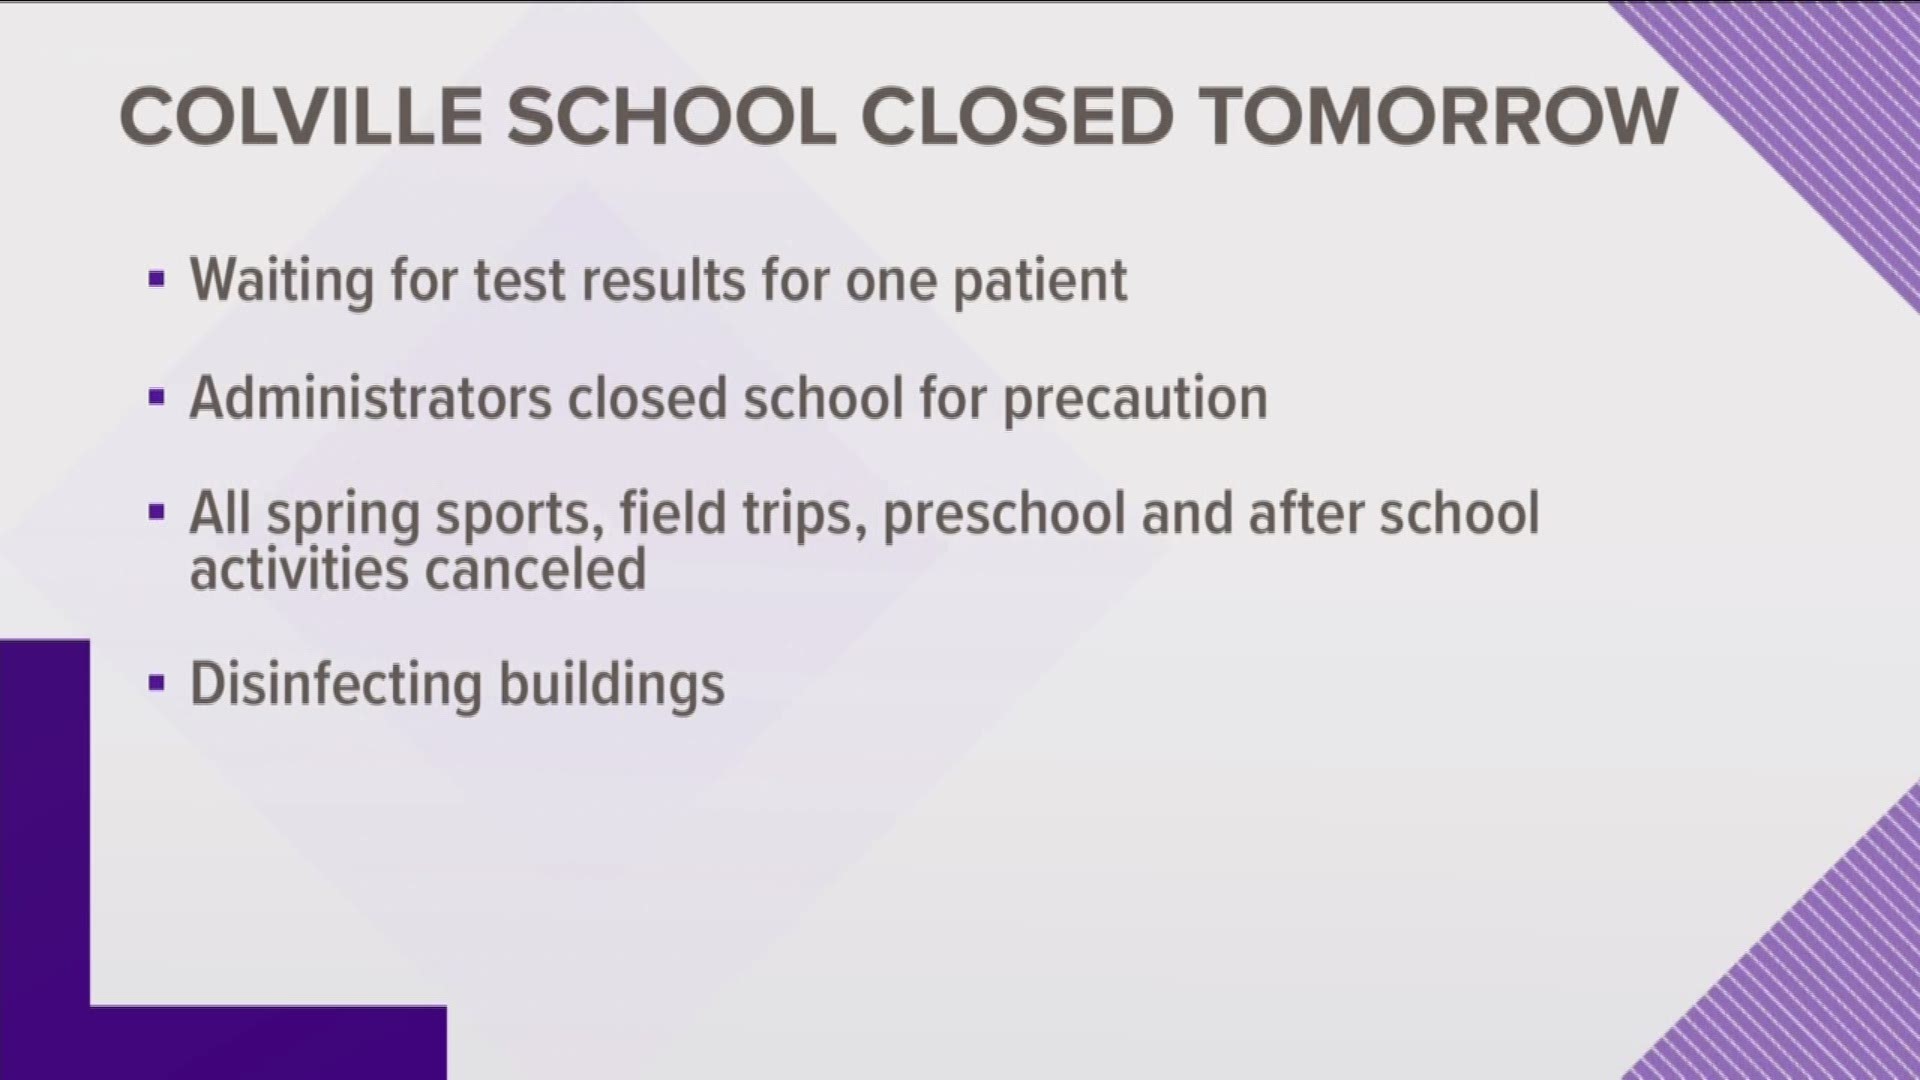 Some school districts in Idaho are also closing on Monday for precautionary coronavirus cleaning.